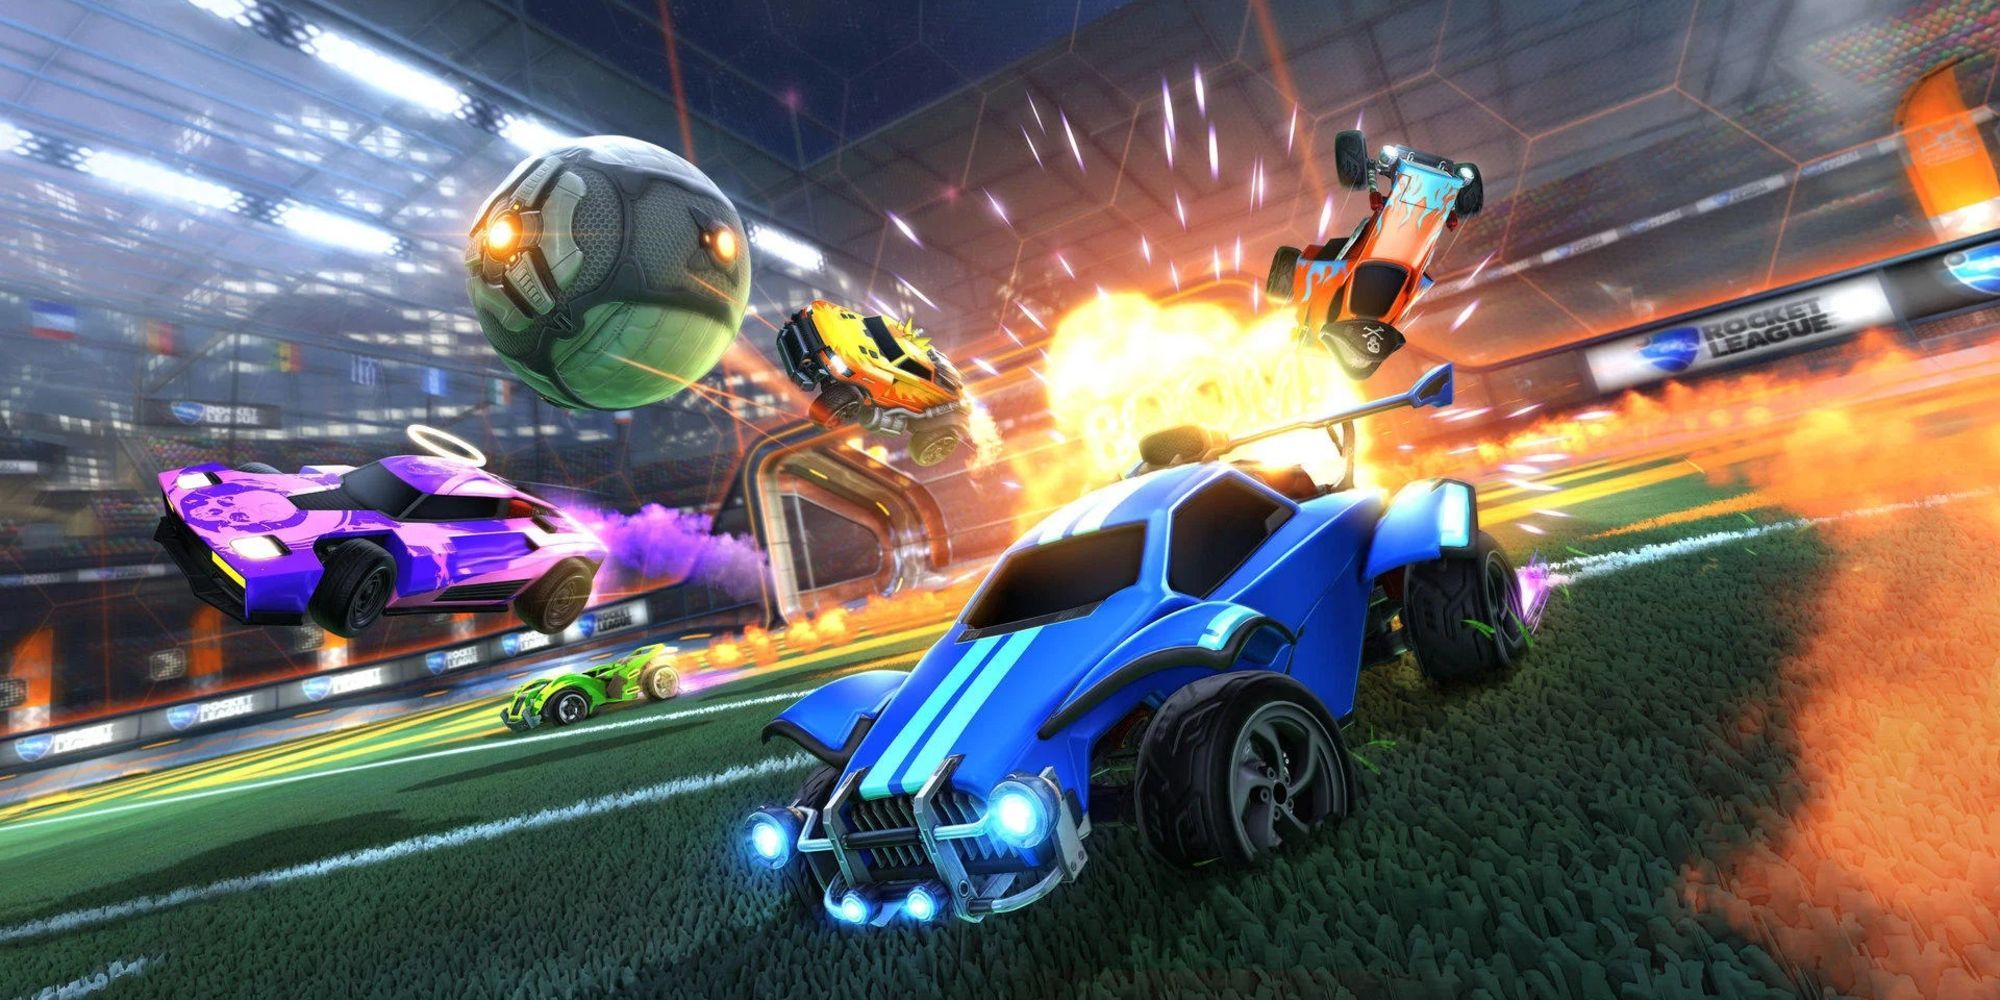 A blue and purple car chase after the ball while other cars explode in the background.